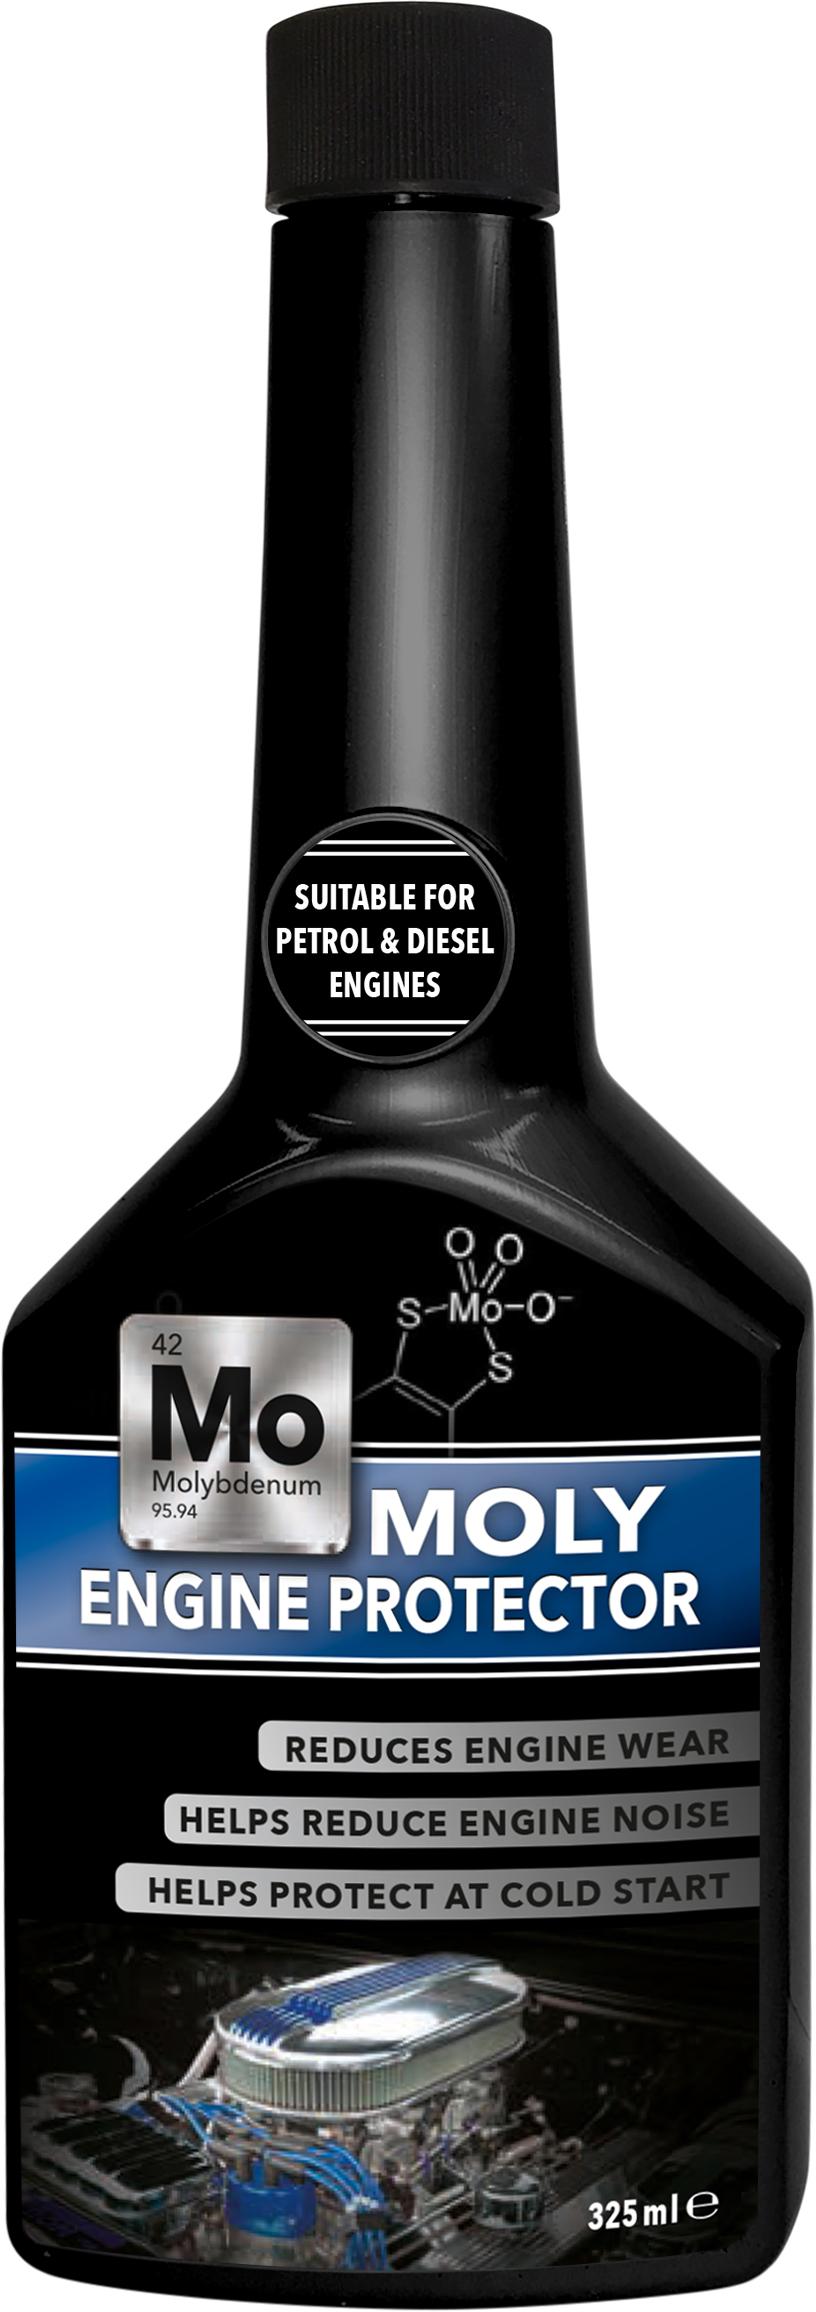 Moly Engine Protector 325Ml